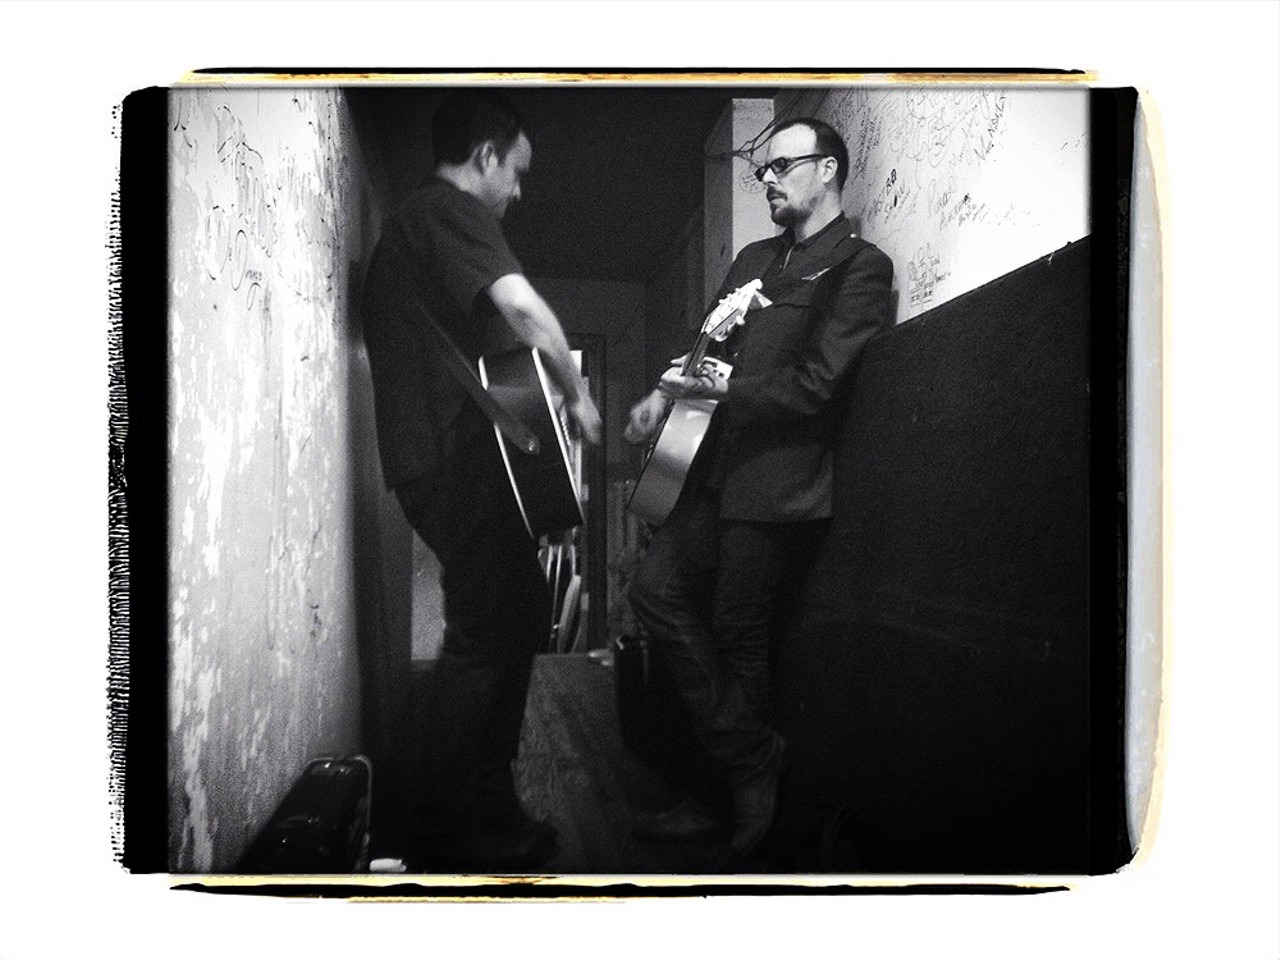 Chris Grabau and Jason Hutto warm up in the hallway behind the stage